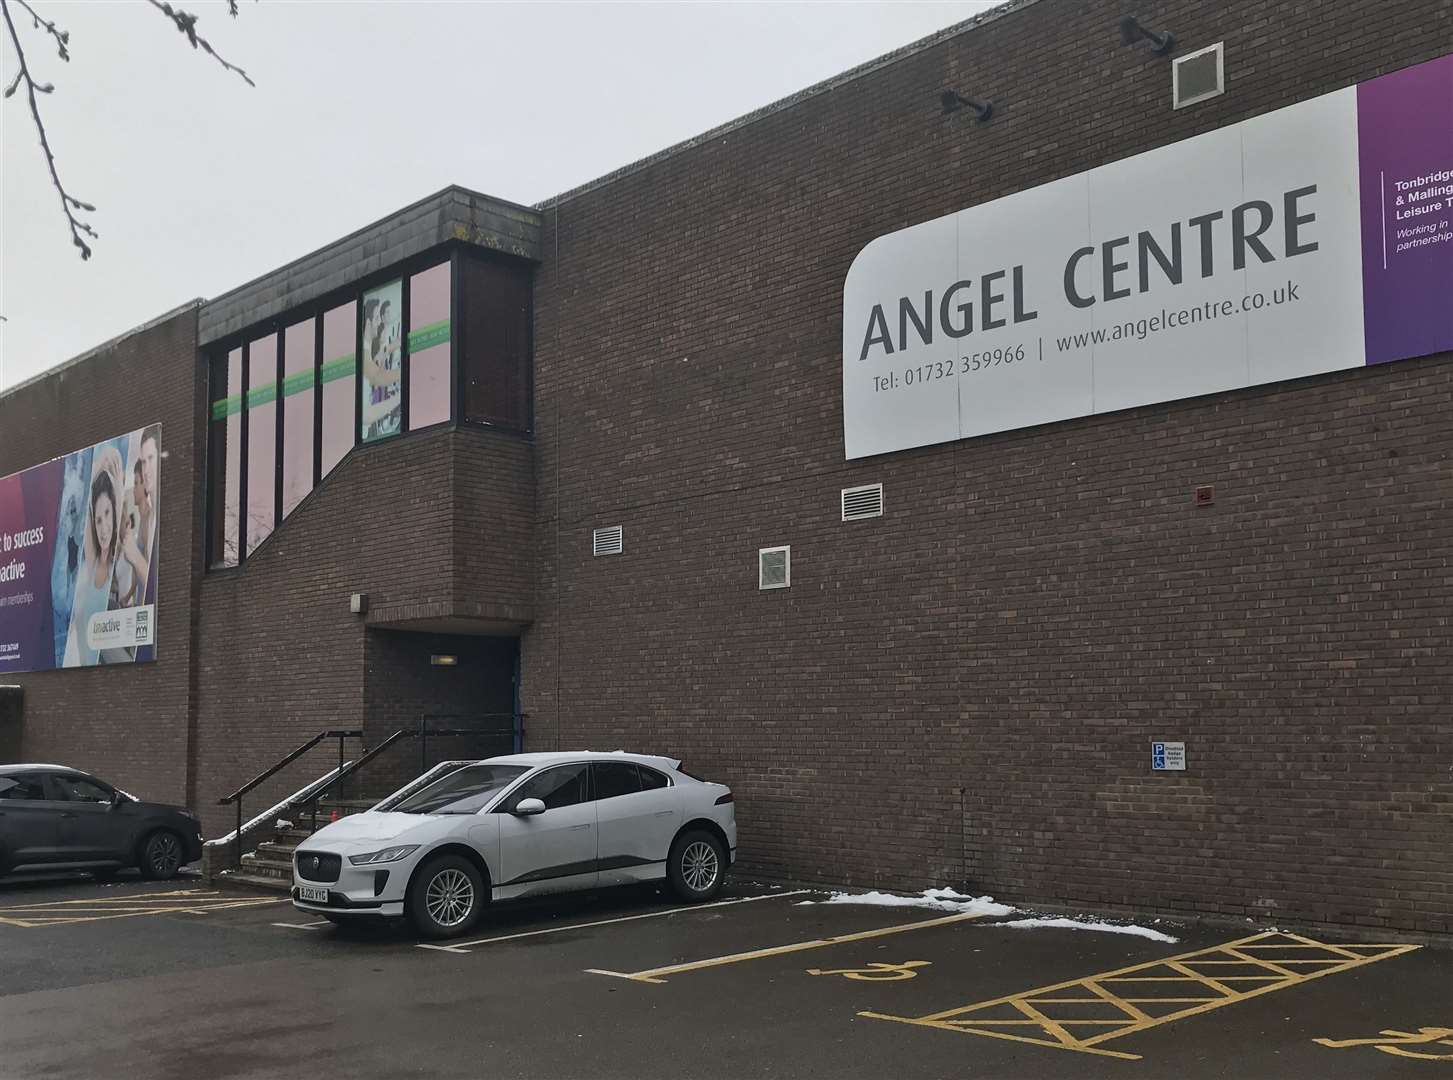 The Angel Centre has been turned into a vaccination hub